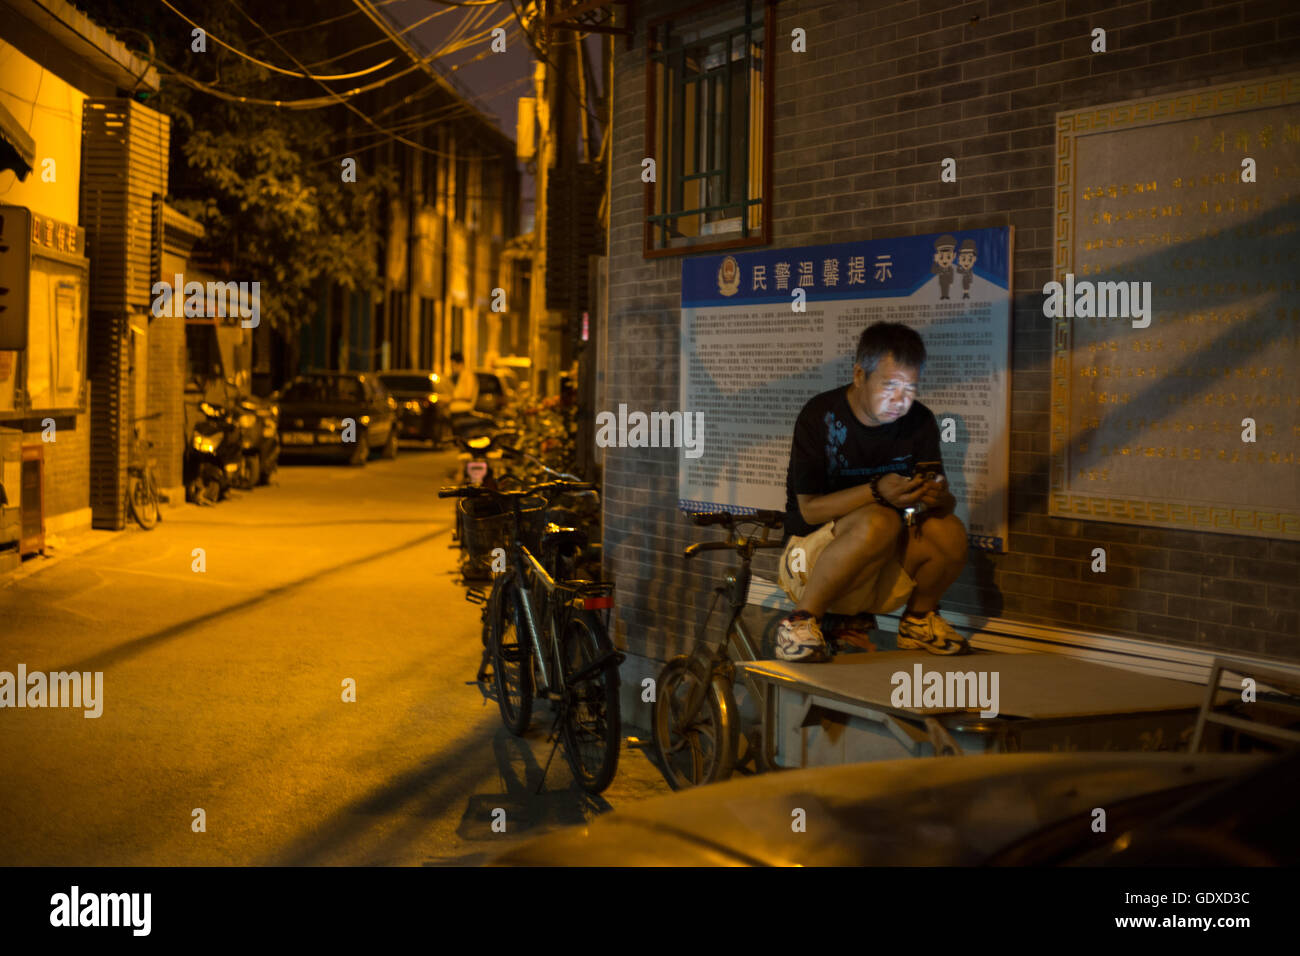 Man using smartphone and internet, in the Shitou hutong area, in Beijing, China. Stock Photo